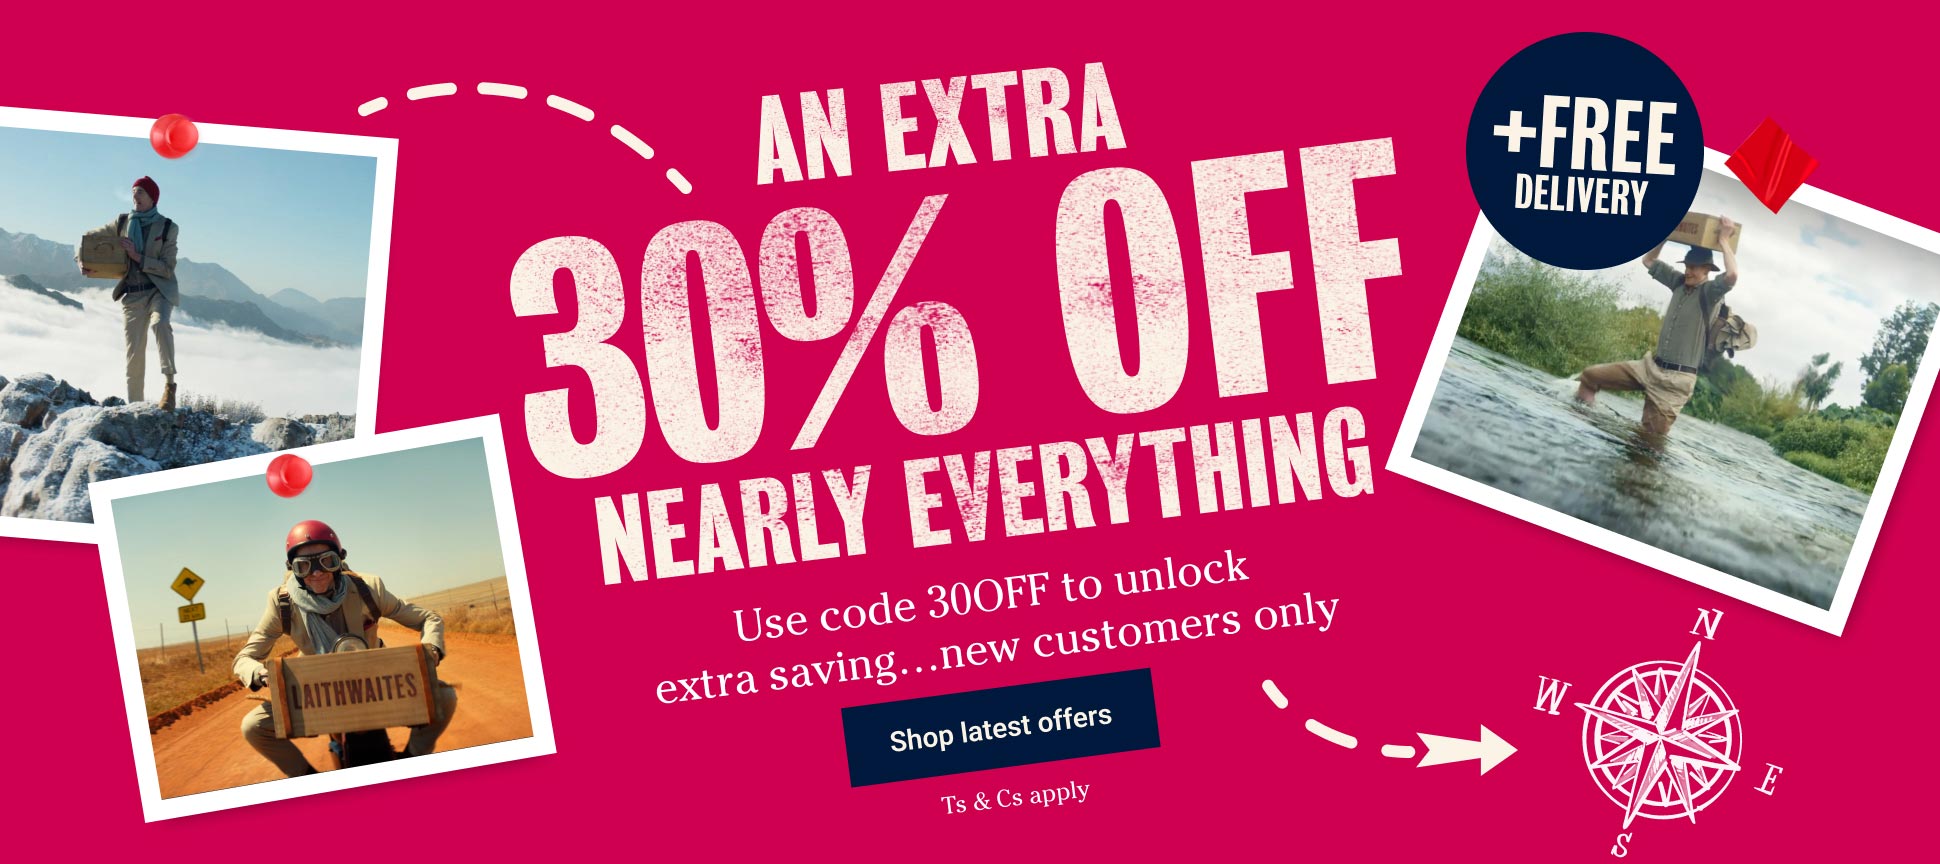 An extra 30% off nearly everything- LW